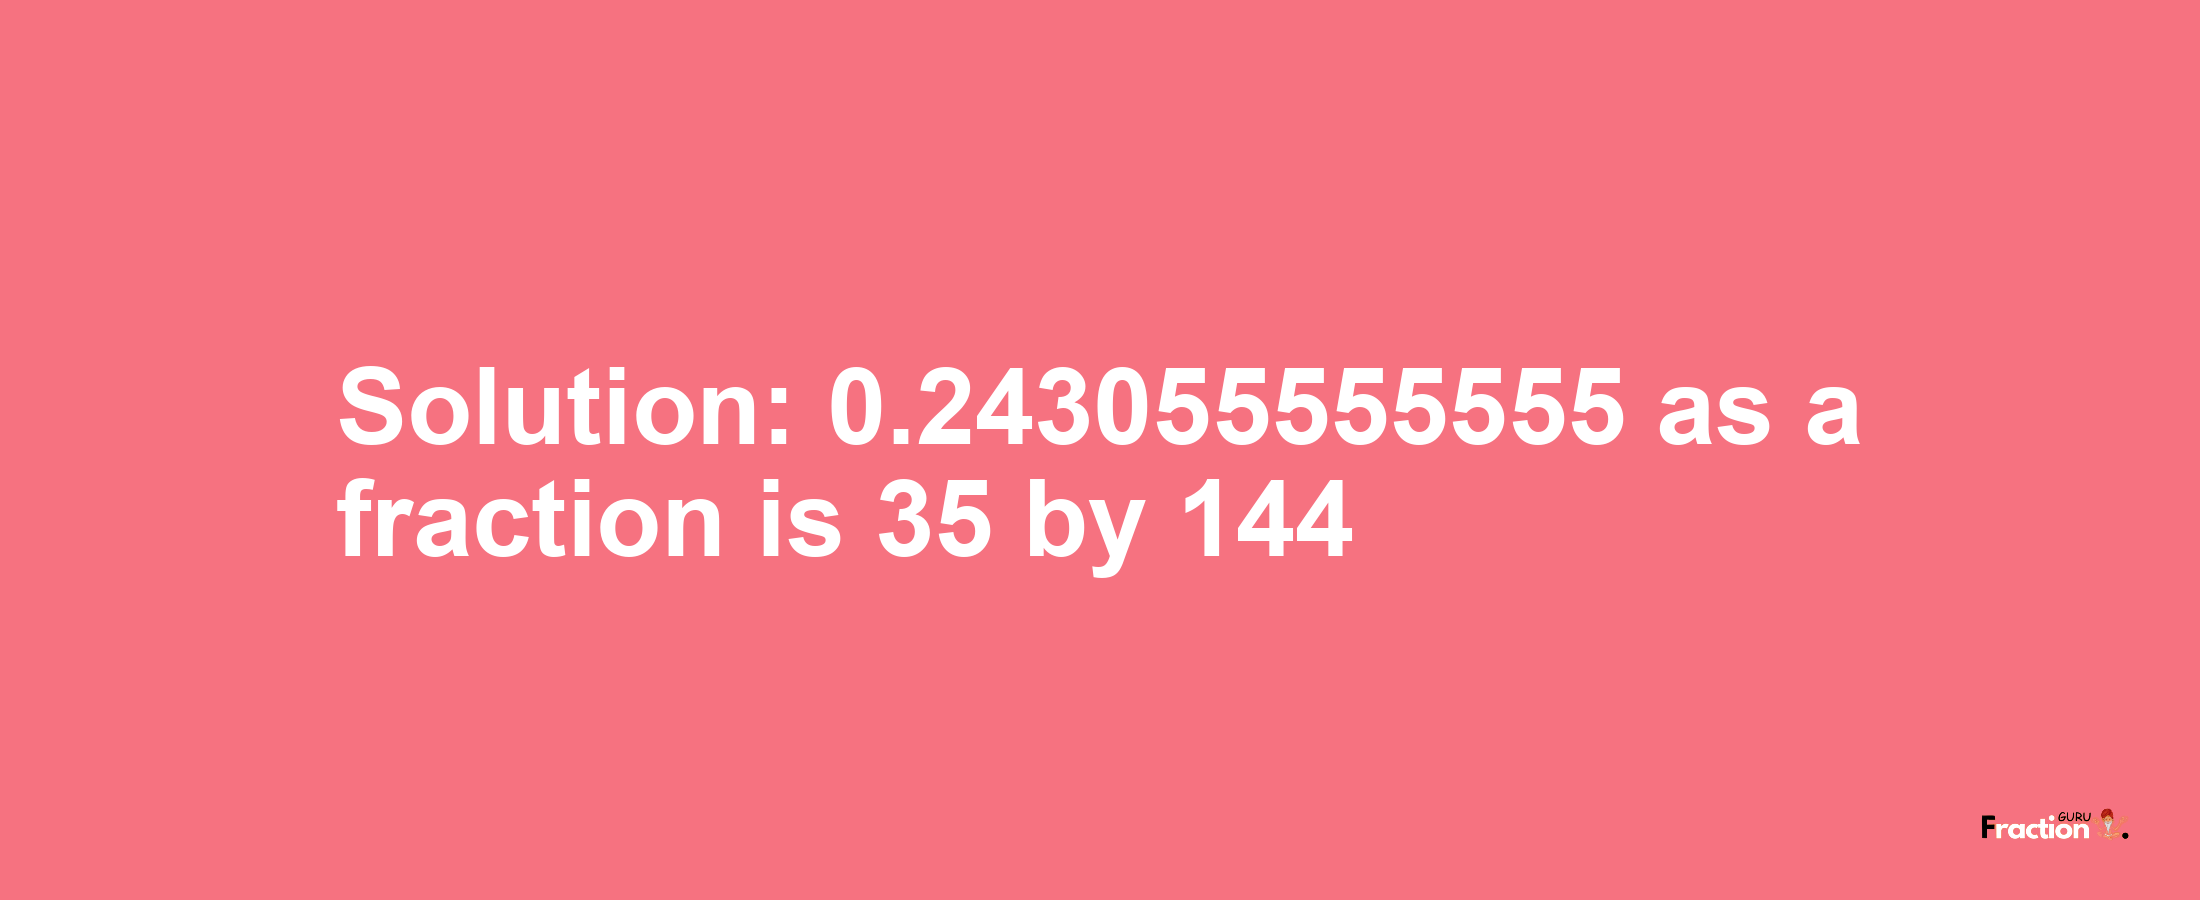 Solution:0.243055555555 as a fraction is 35/144